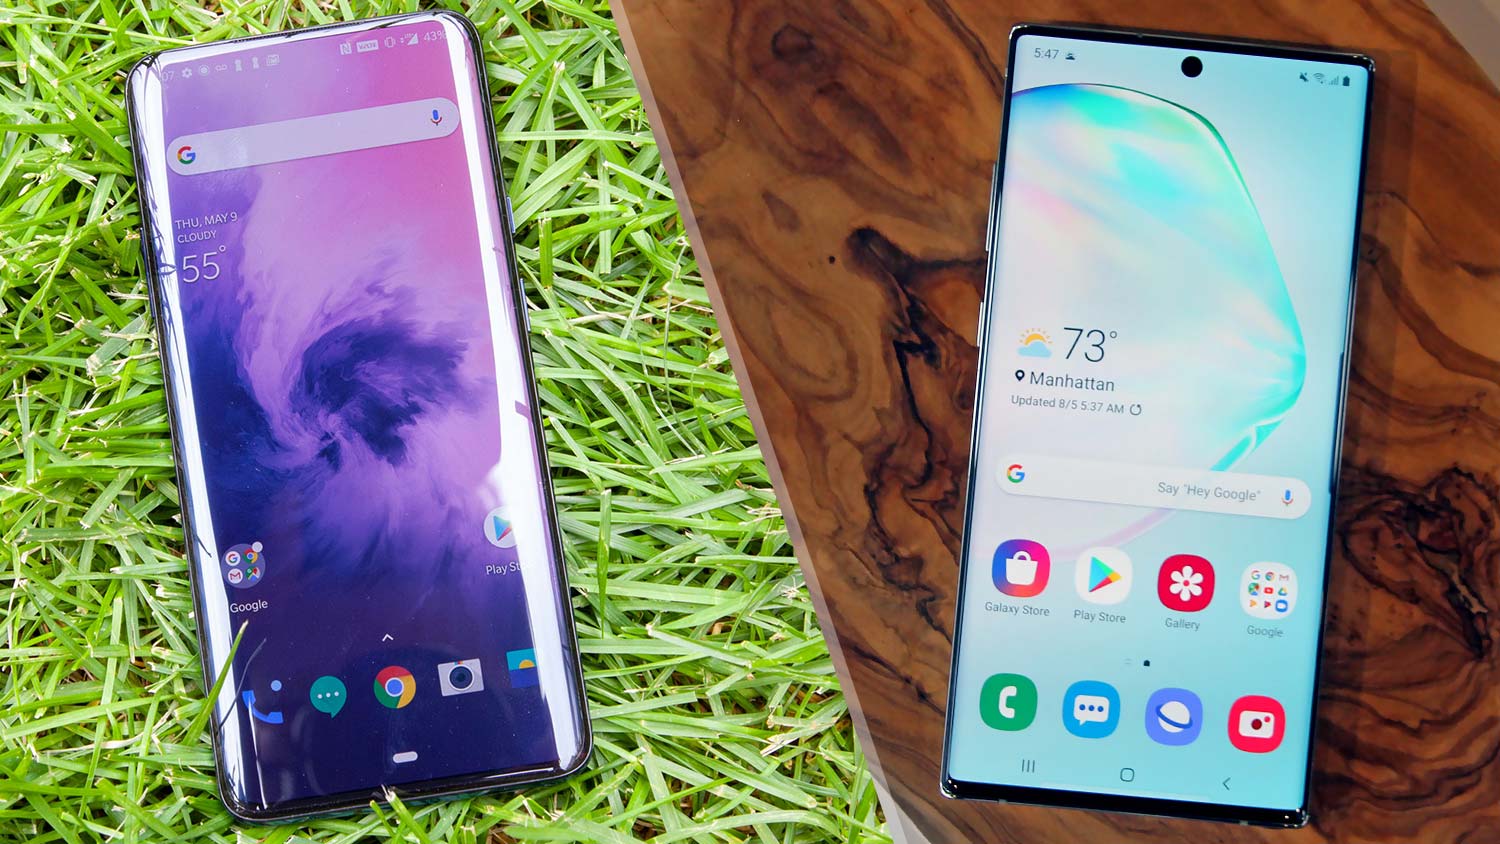 Galaxy Note 10 Vs OnePlus 7 Pro Specs Compared Toms Guide.